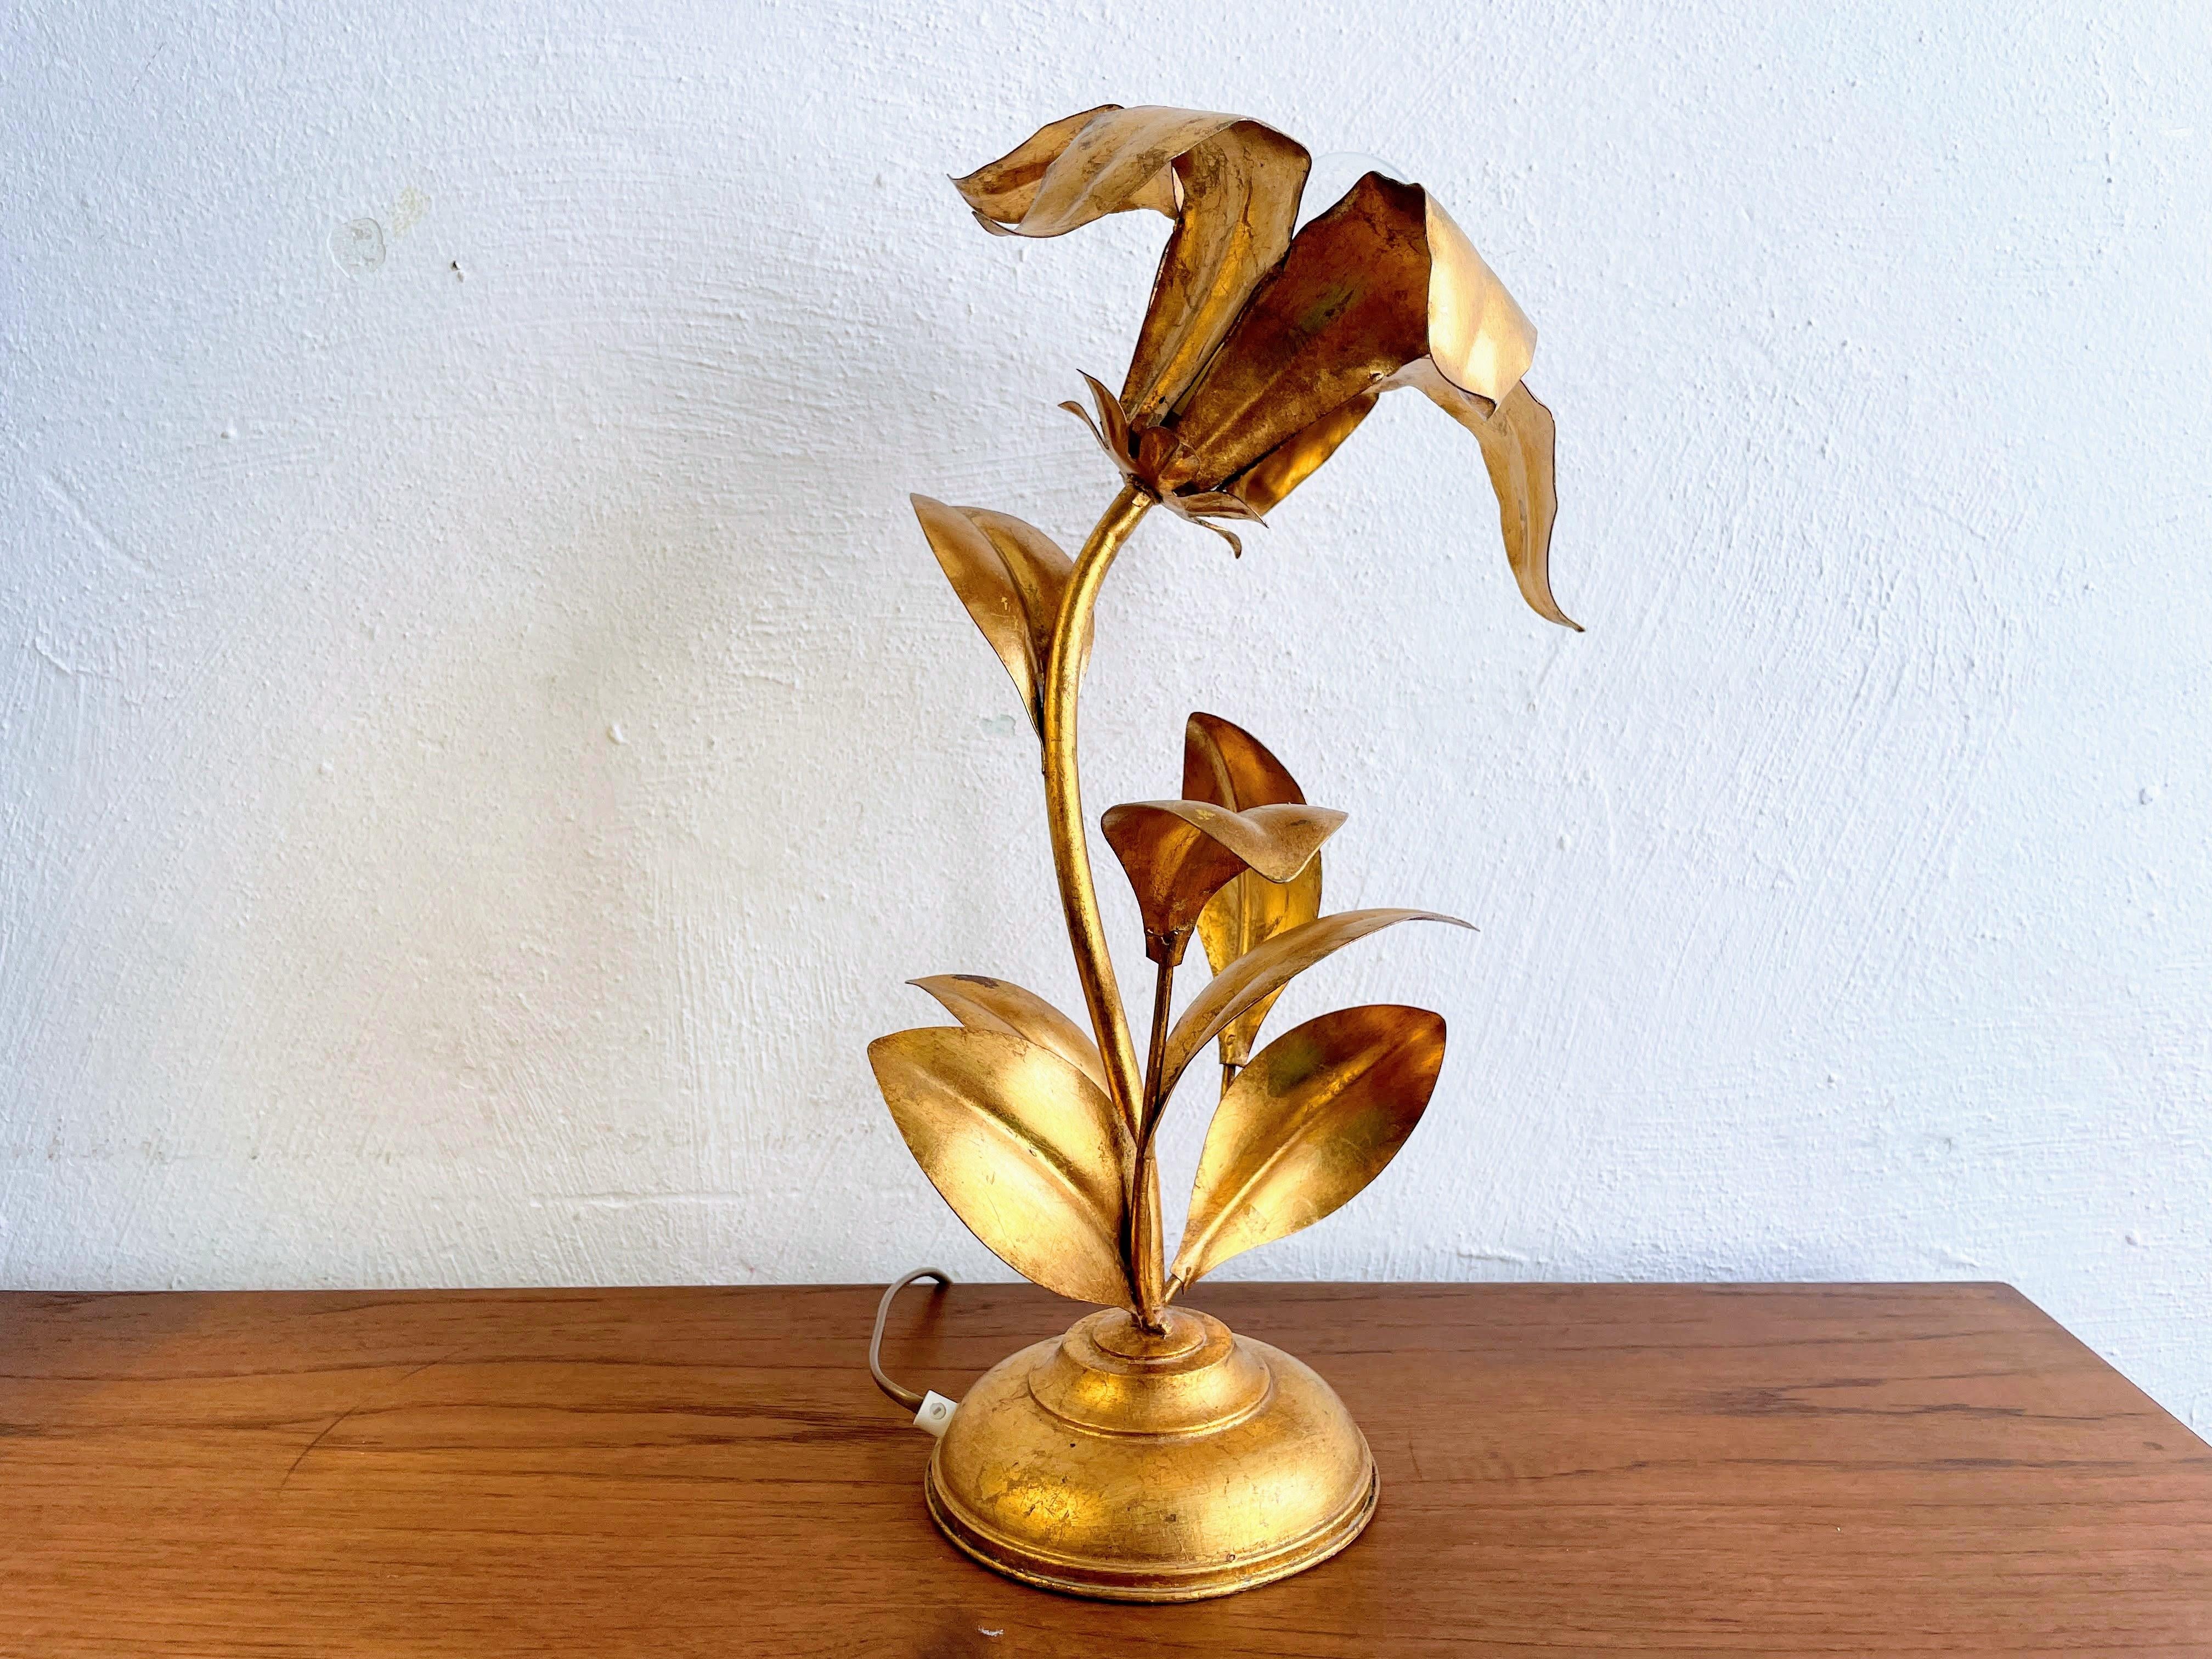 Hollywood Regency Style Flower-Shaped Table Lamp in the style of Koegl, gold In Good Condition For Sale In Hamburg, DE